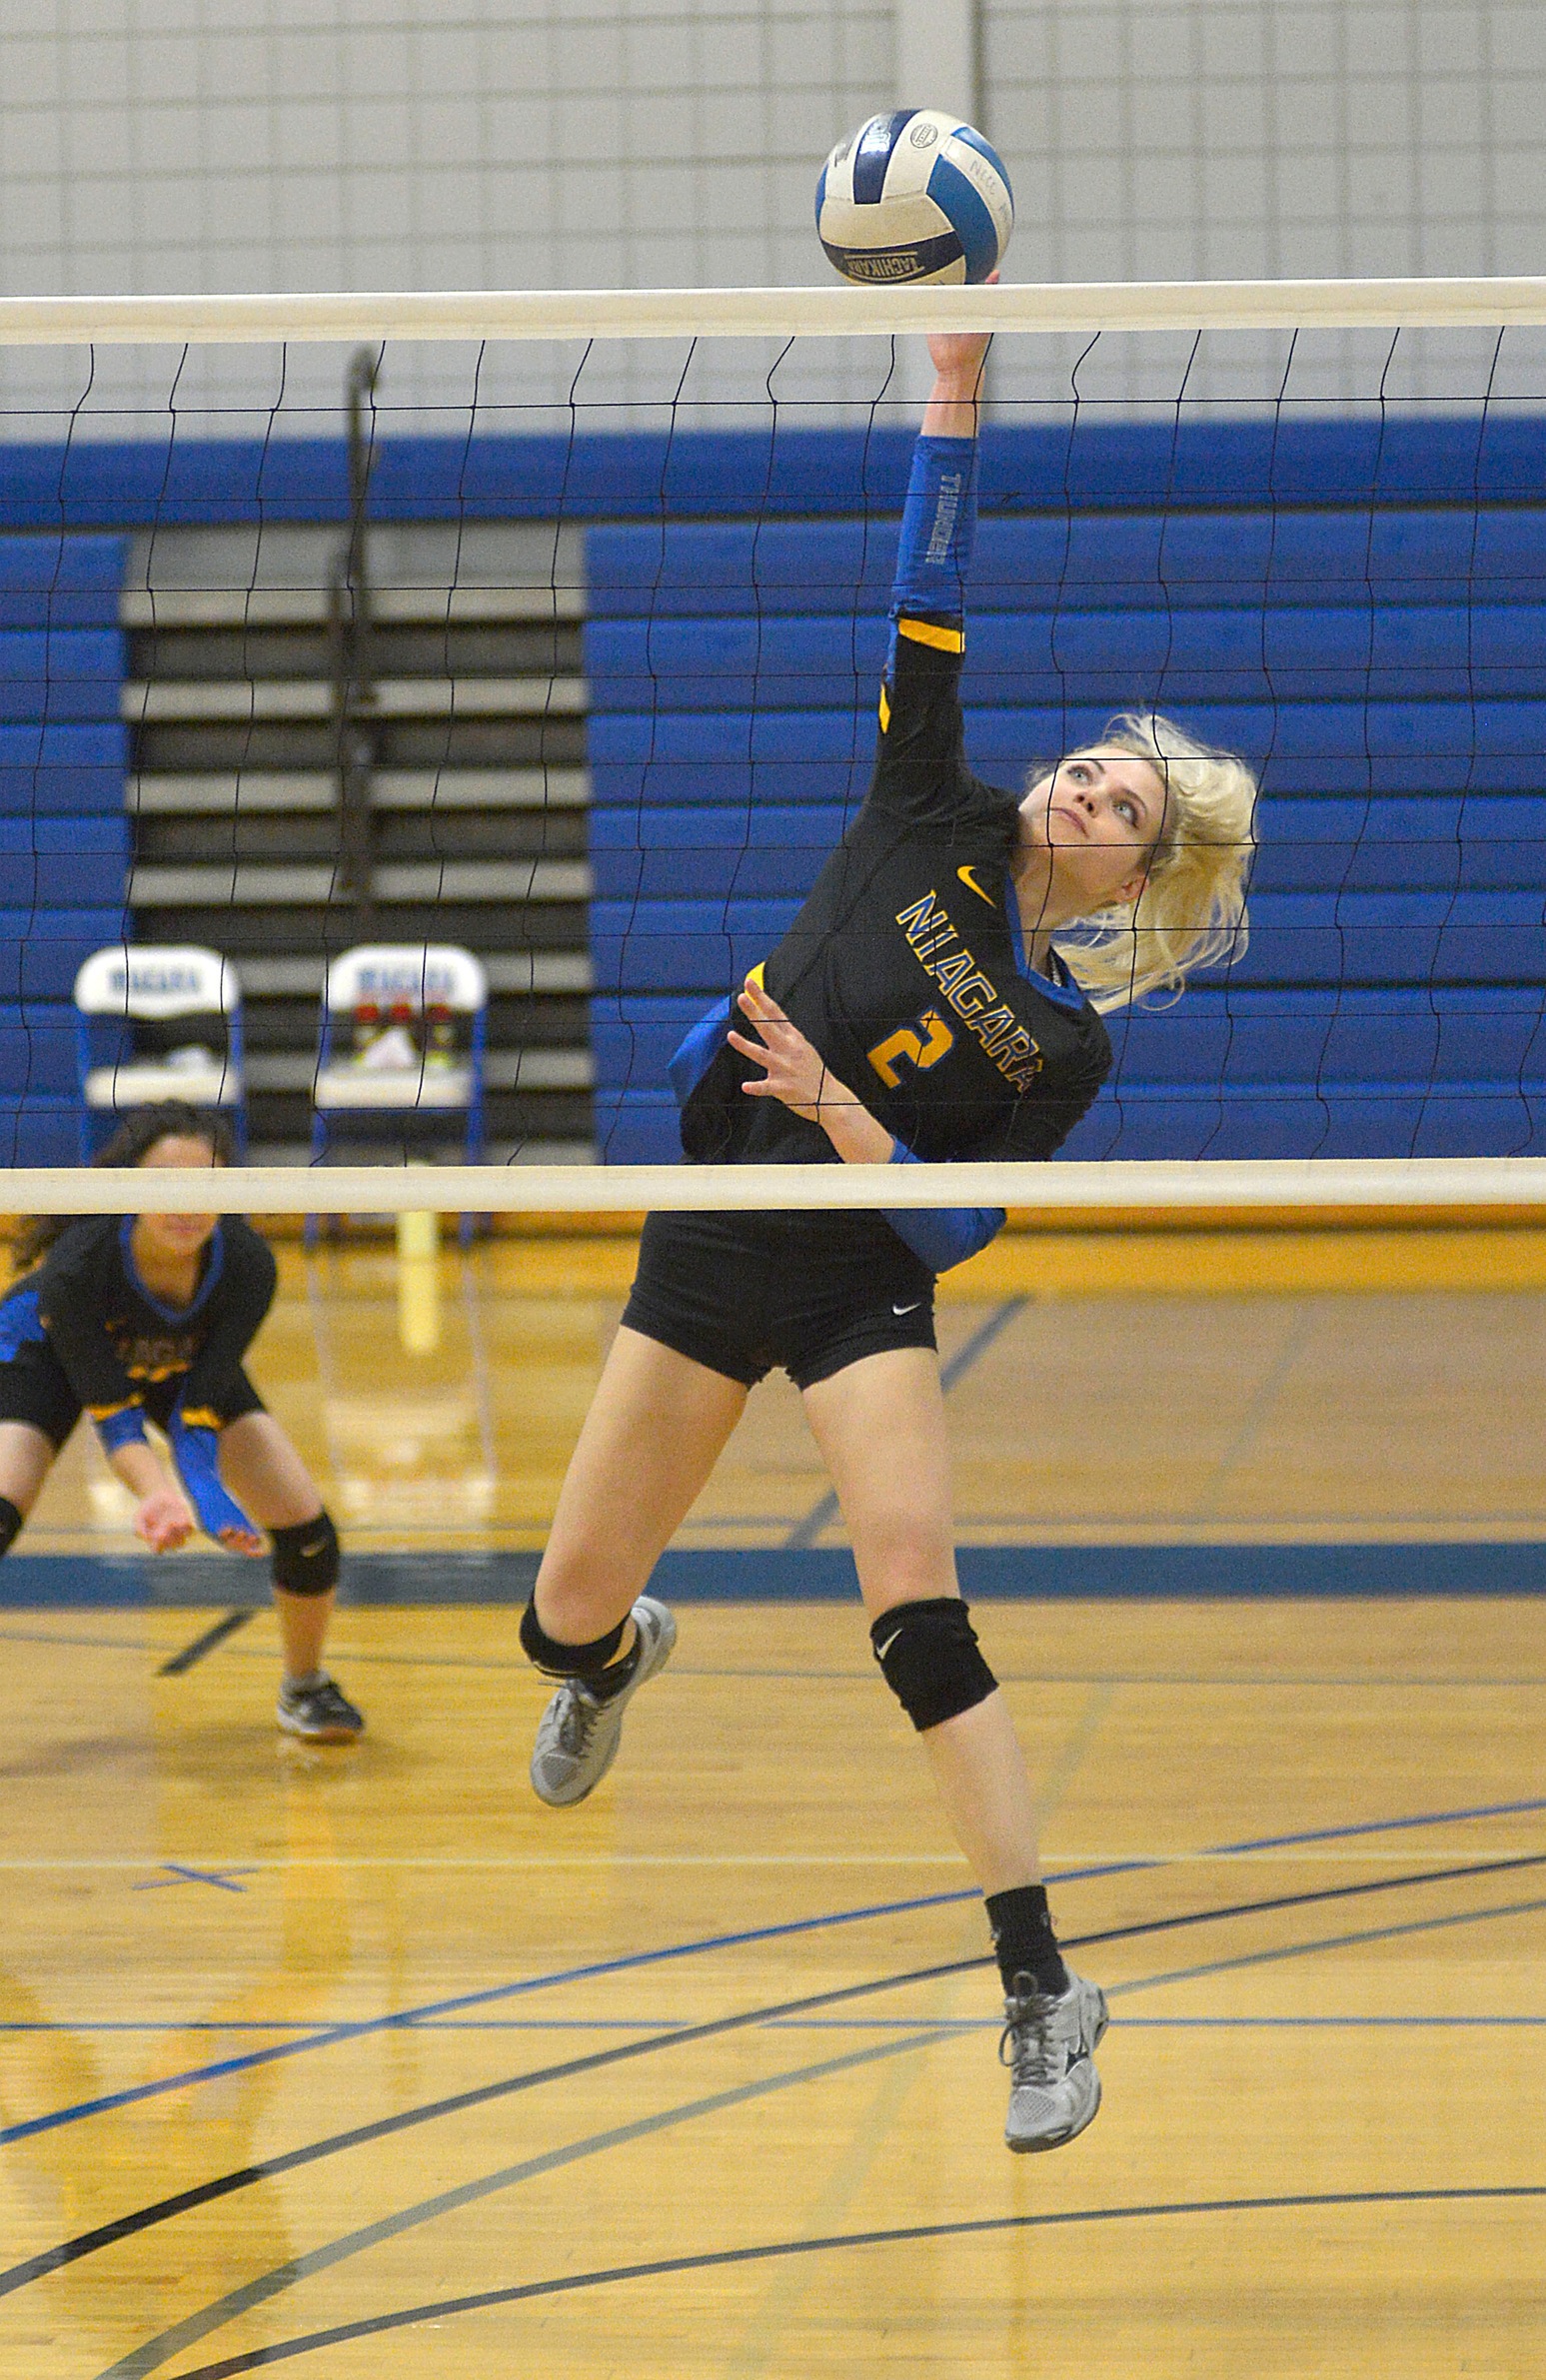 NCCC falls to Jayhawks in straight sets